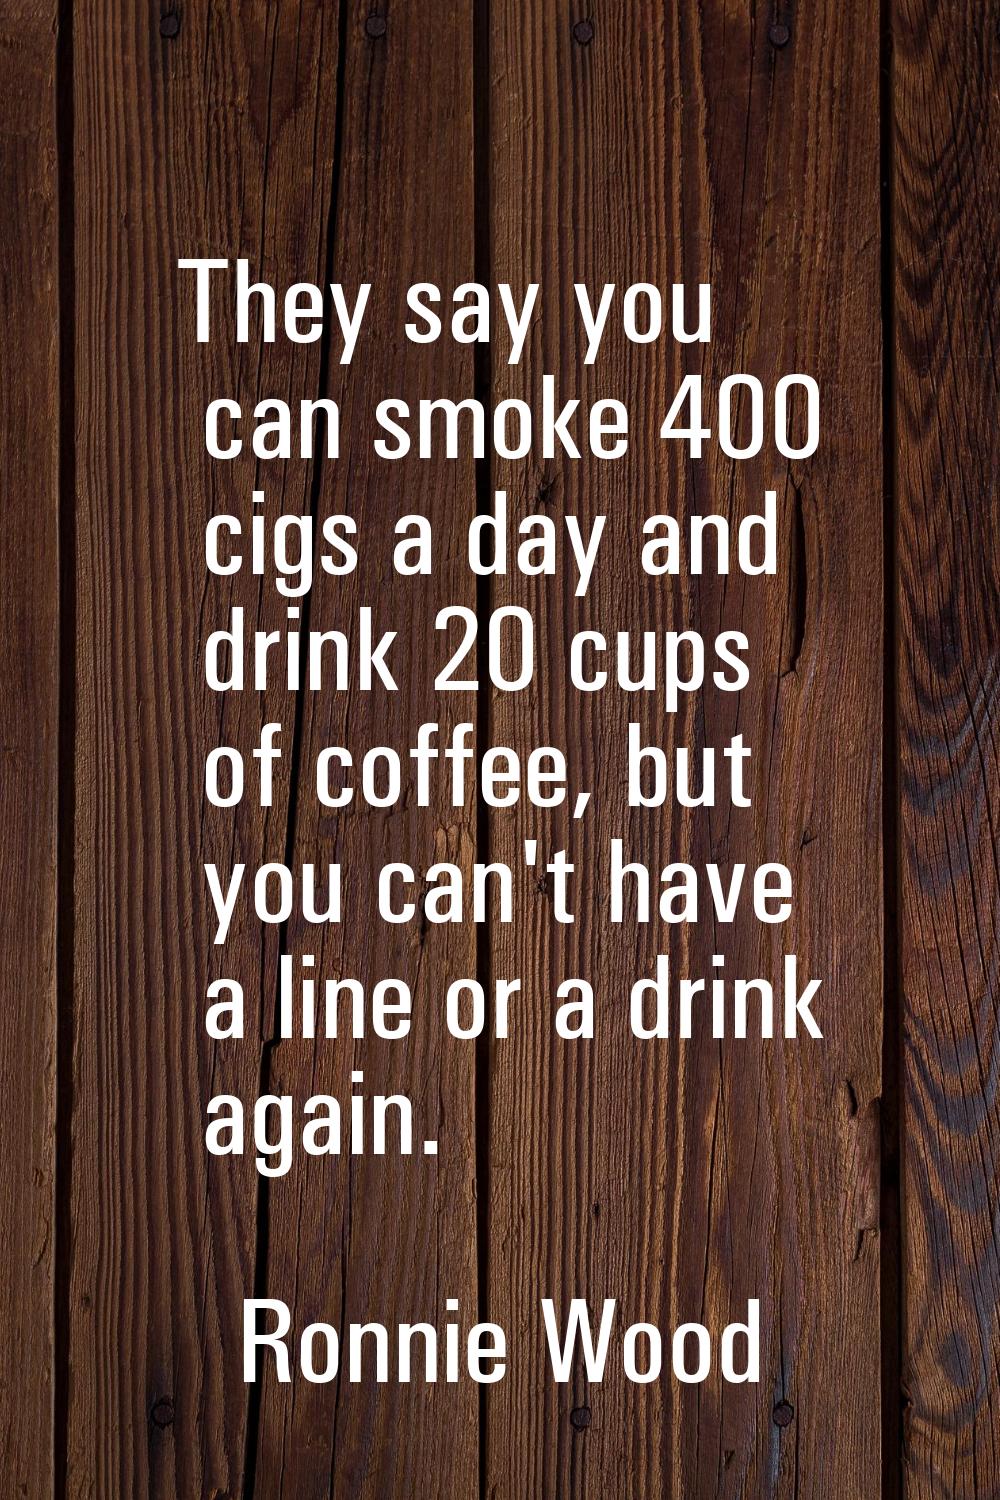 They say you can smoke 400 cigs a day and drink 20 cups of coffee, but you can't have a line or a d